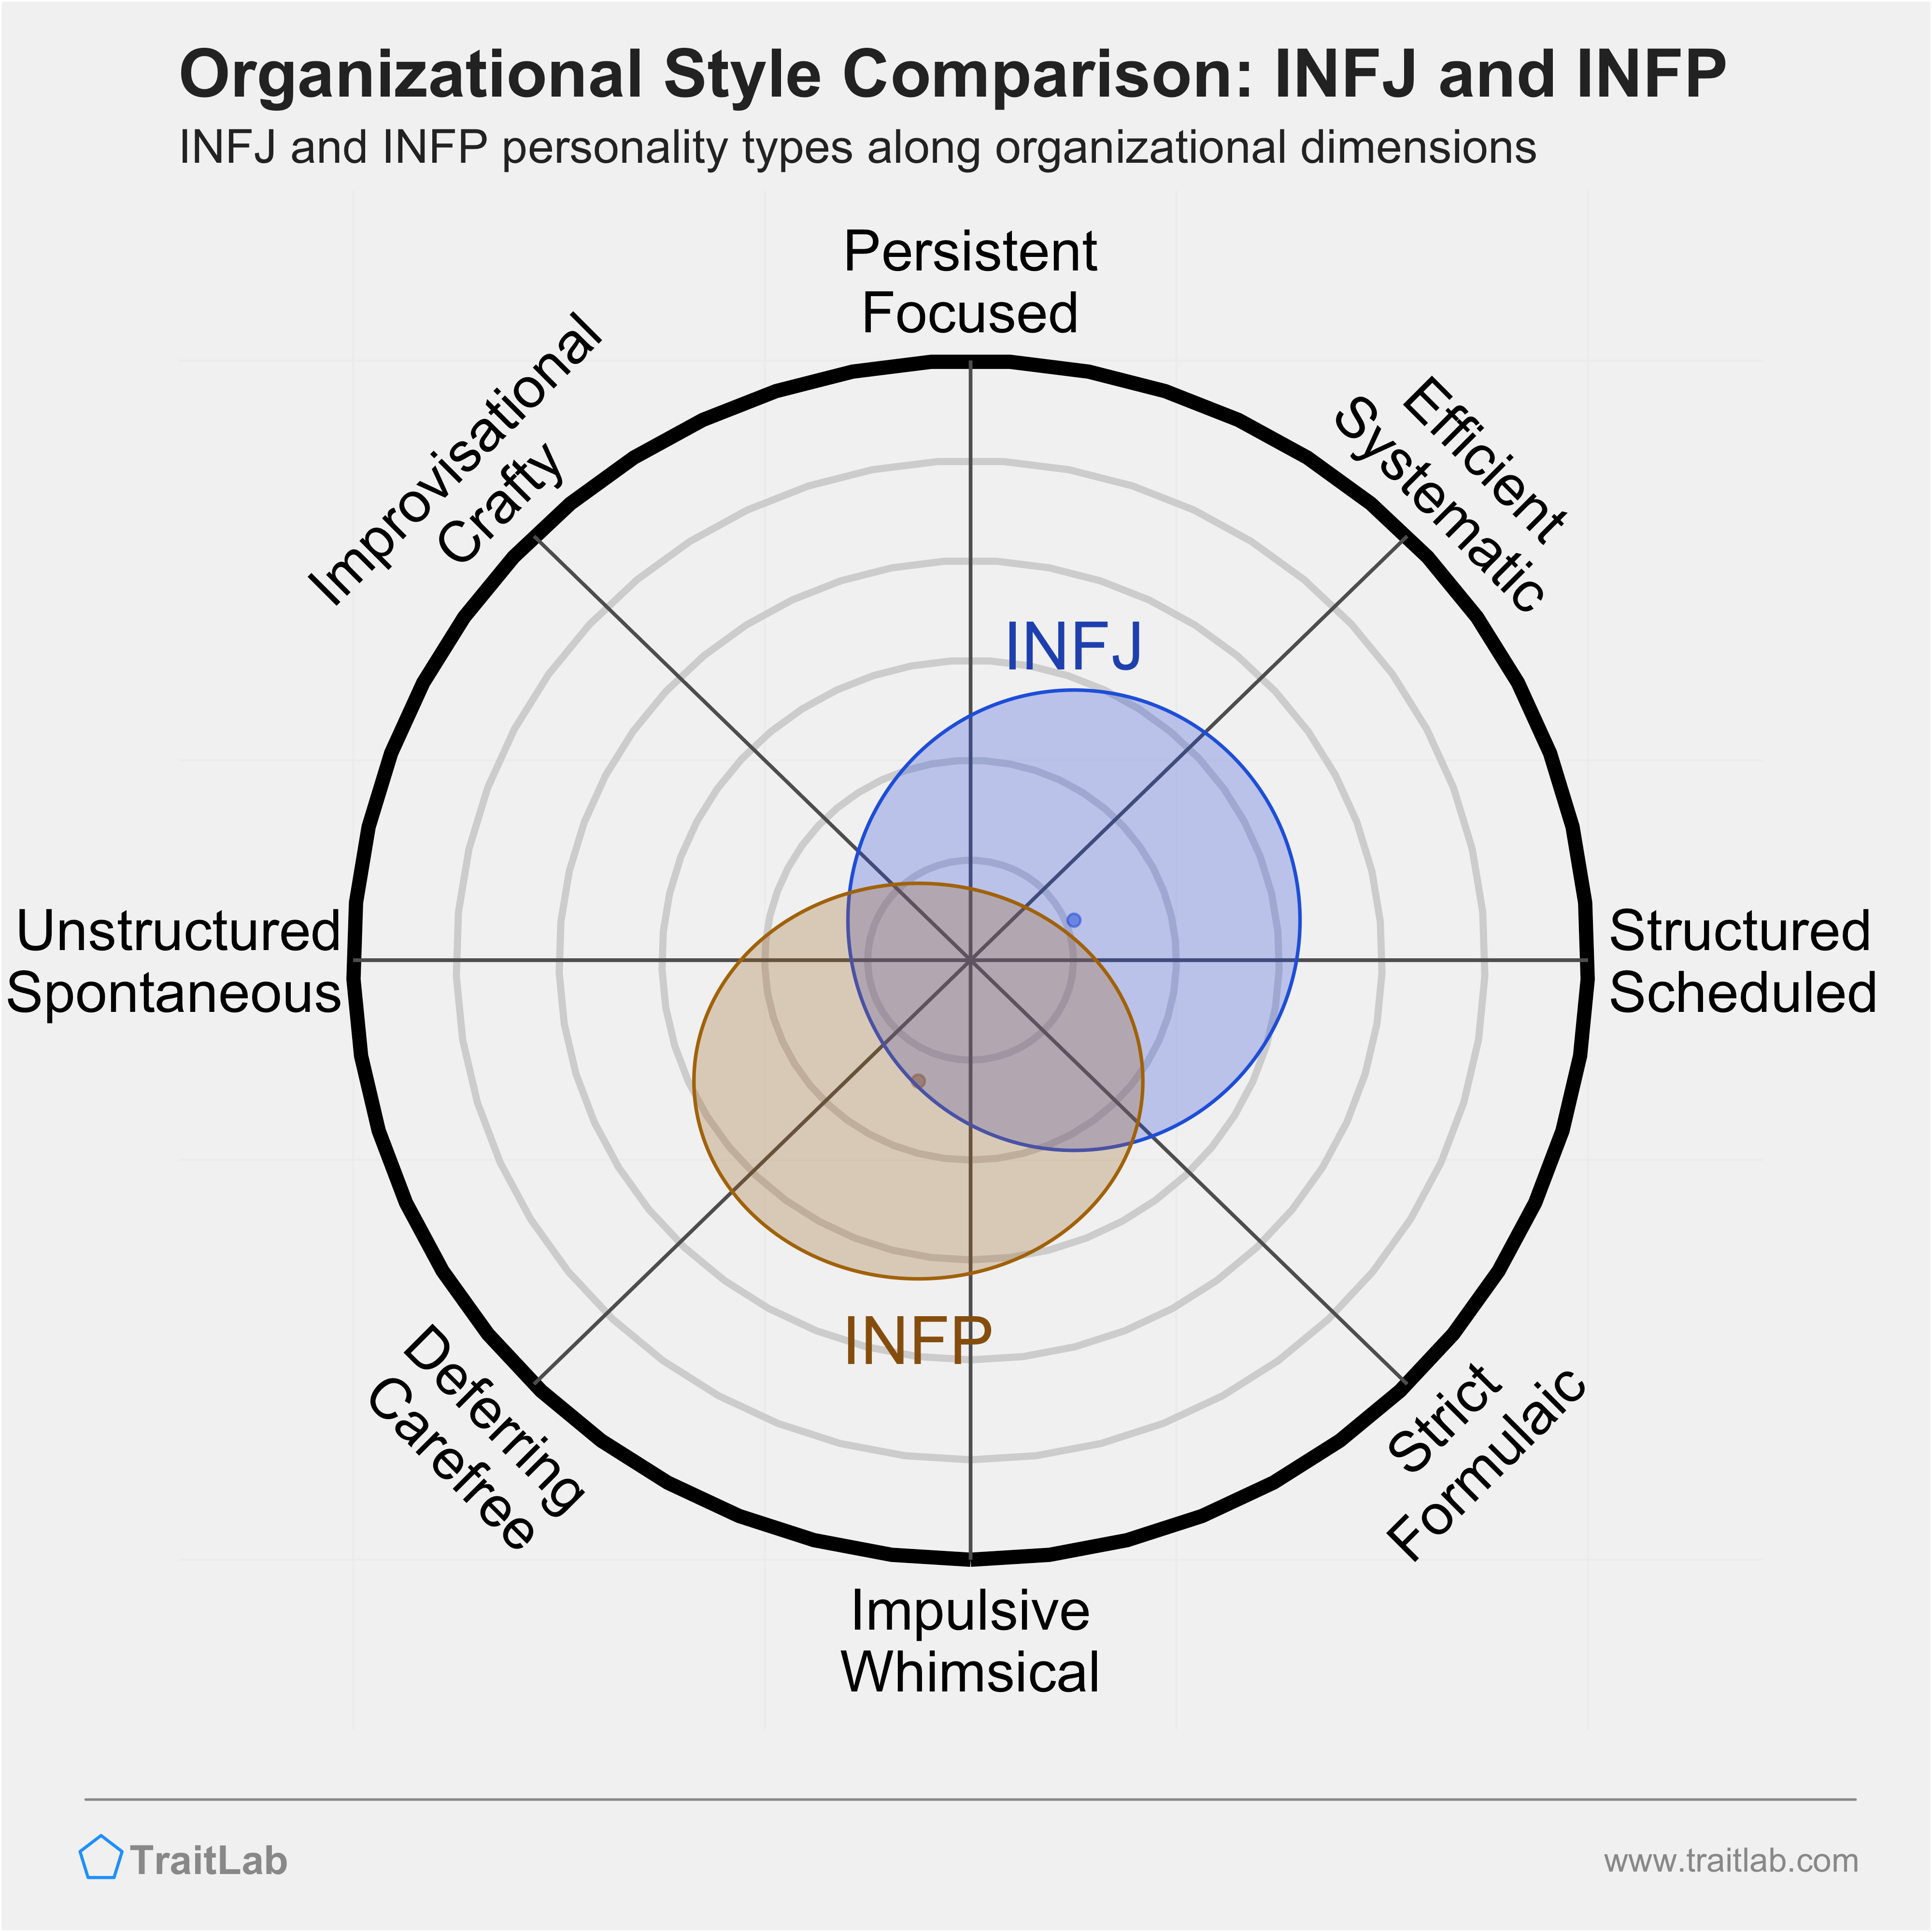 INFJ and INFP comparison across organizational dimensions